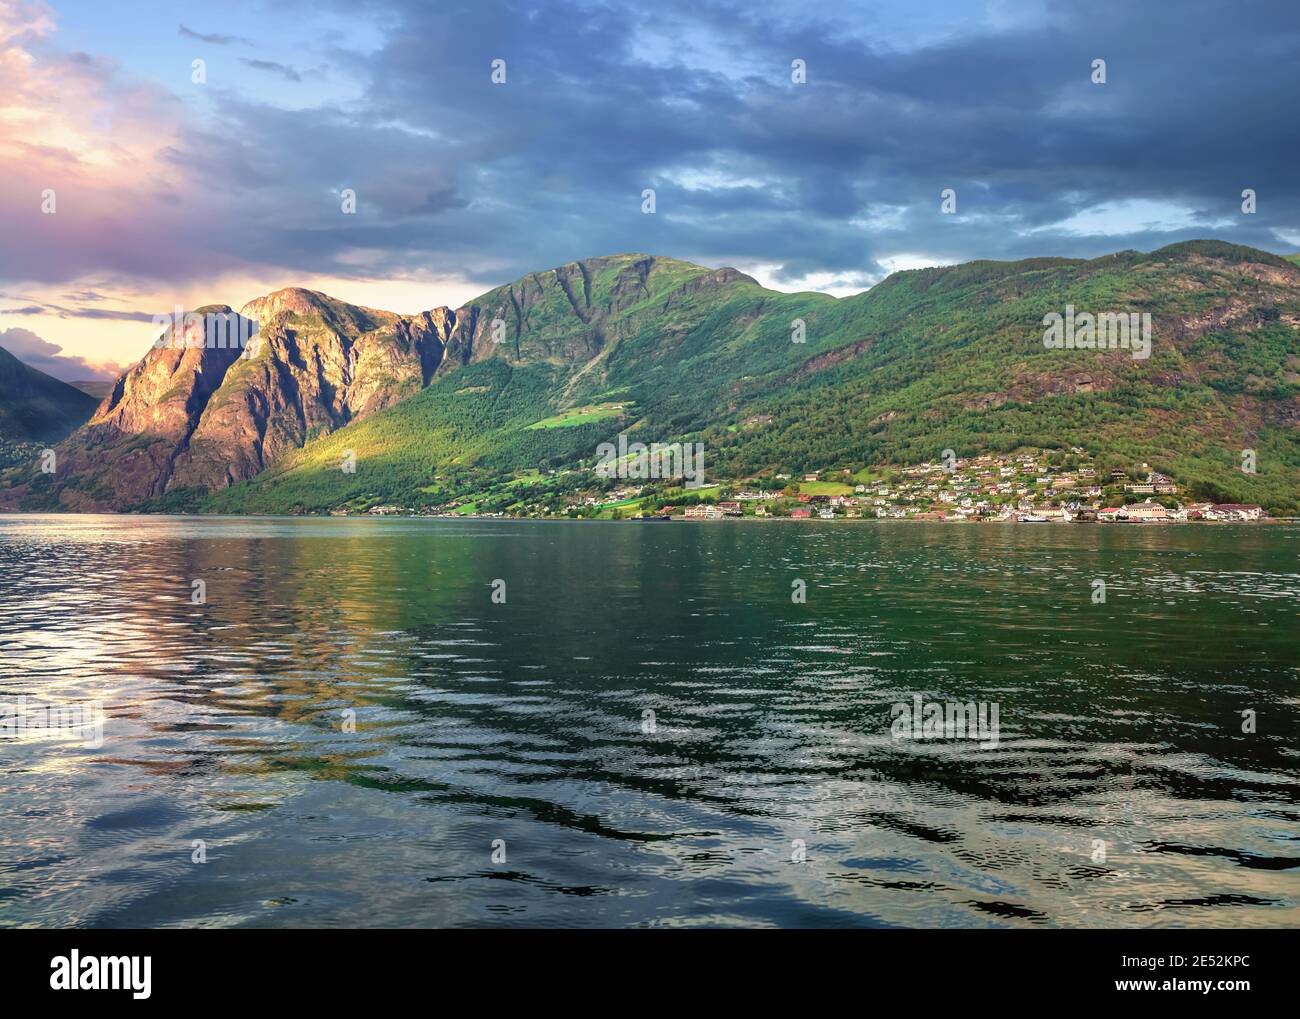 Scenic view of coastline with small village. Sognefjord, Flam, Aurlandsfjord, Norway Stock Photo